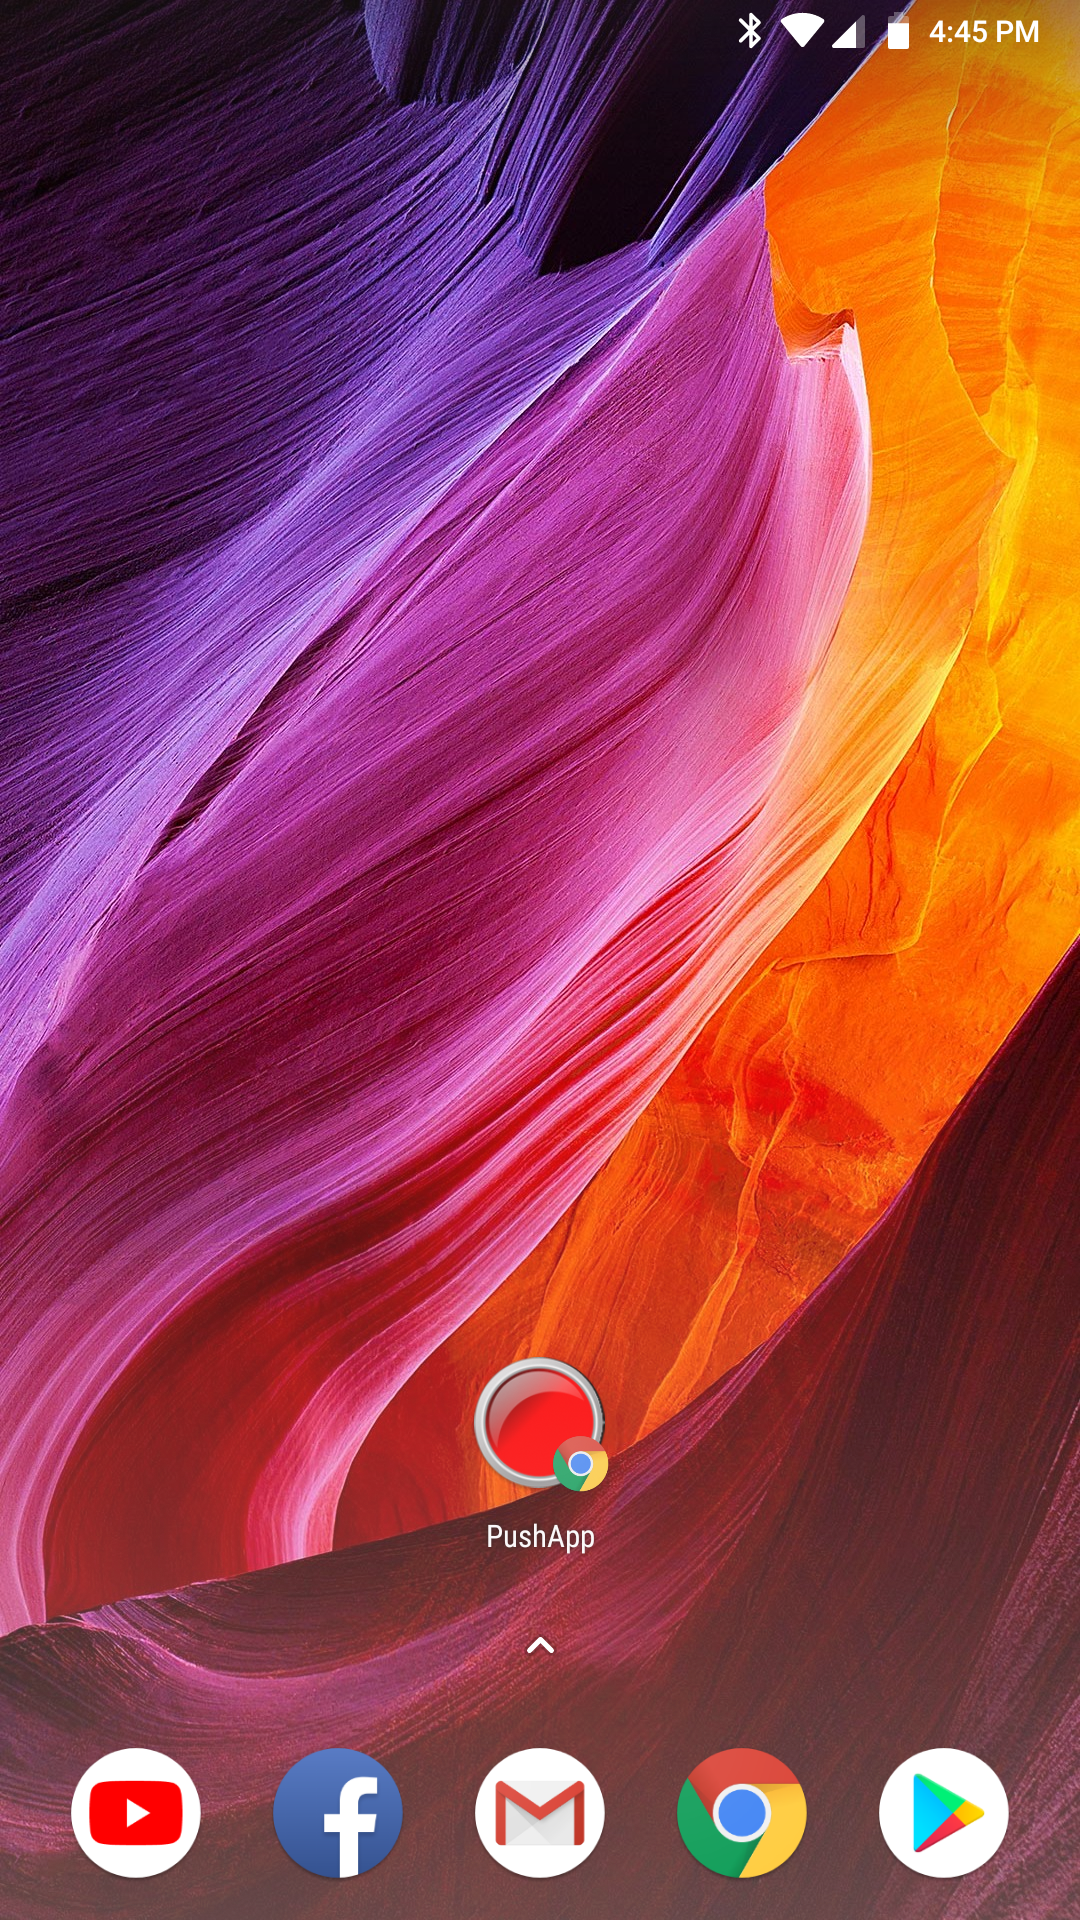 Figure 21: The app icon on the Home Screen of the Android device